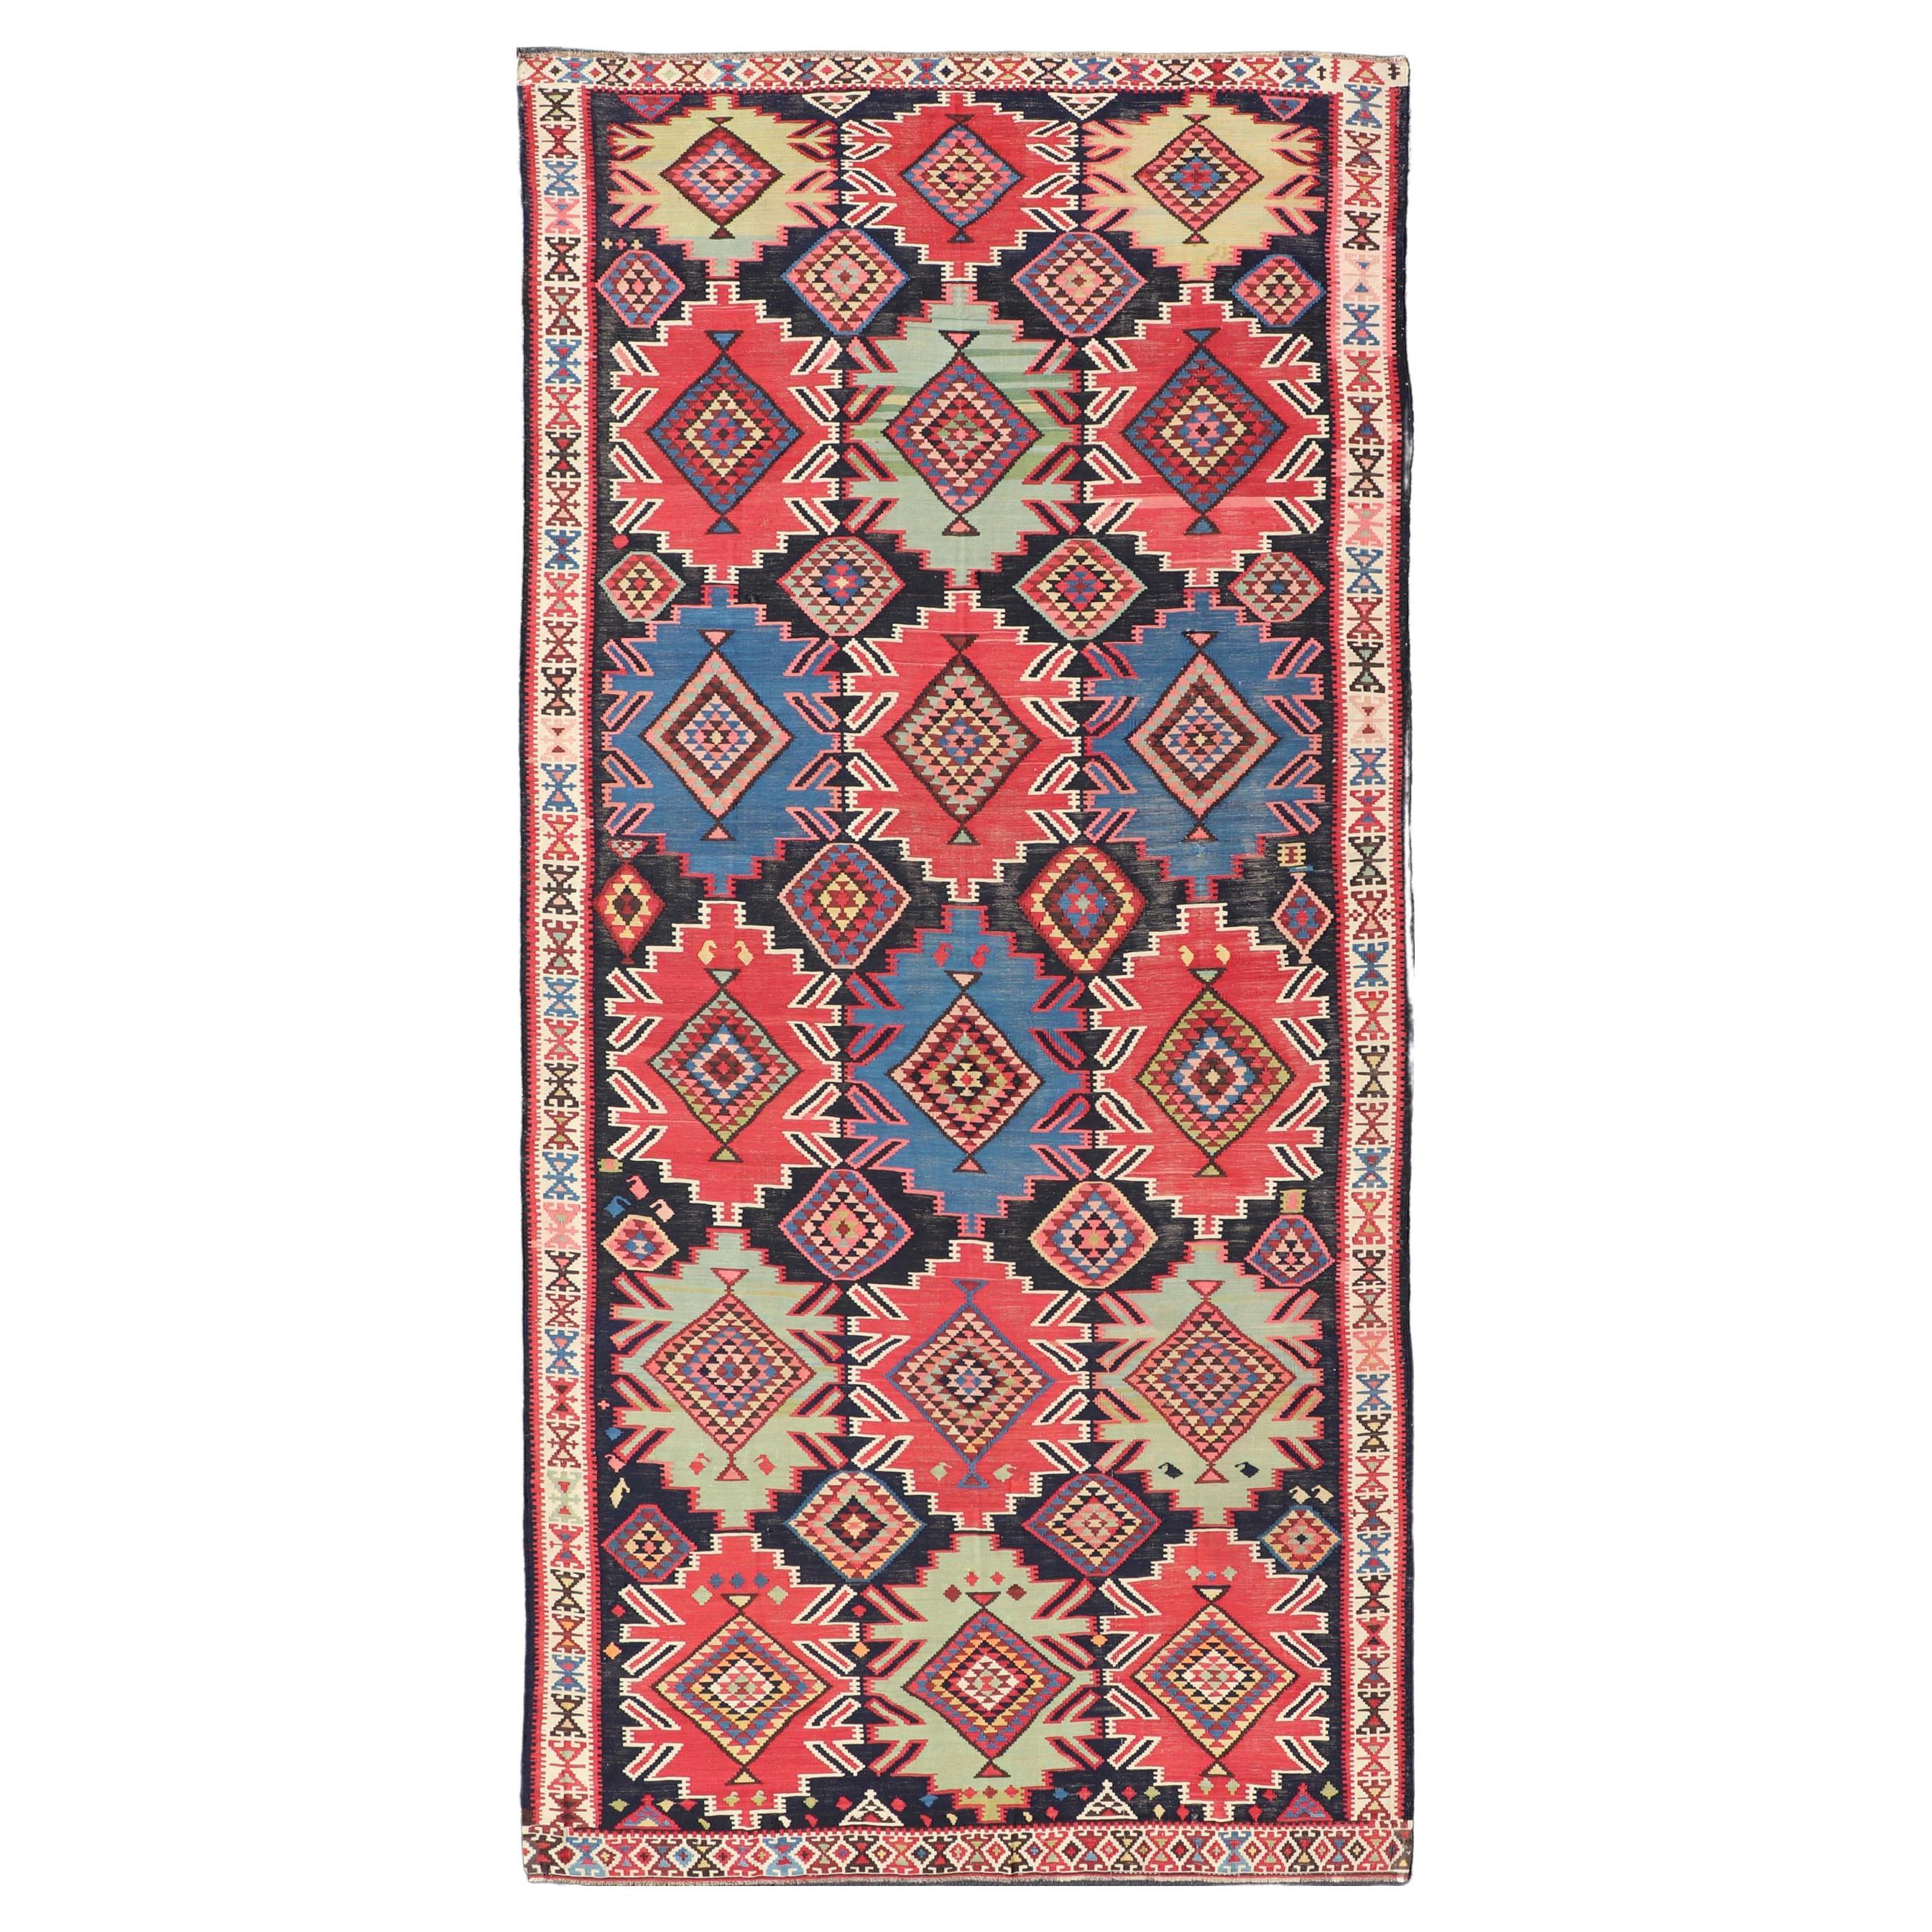 19th Century Antique Kuba Kilim Gallery Rug in with Vibrant Colors For Sale